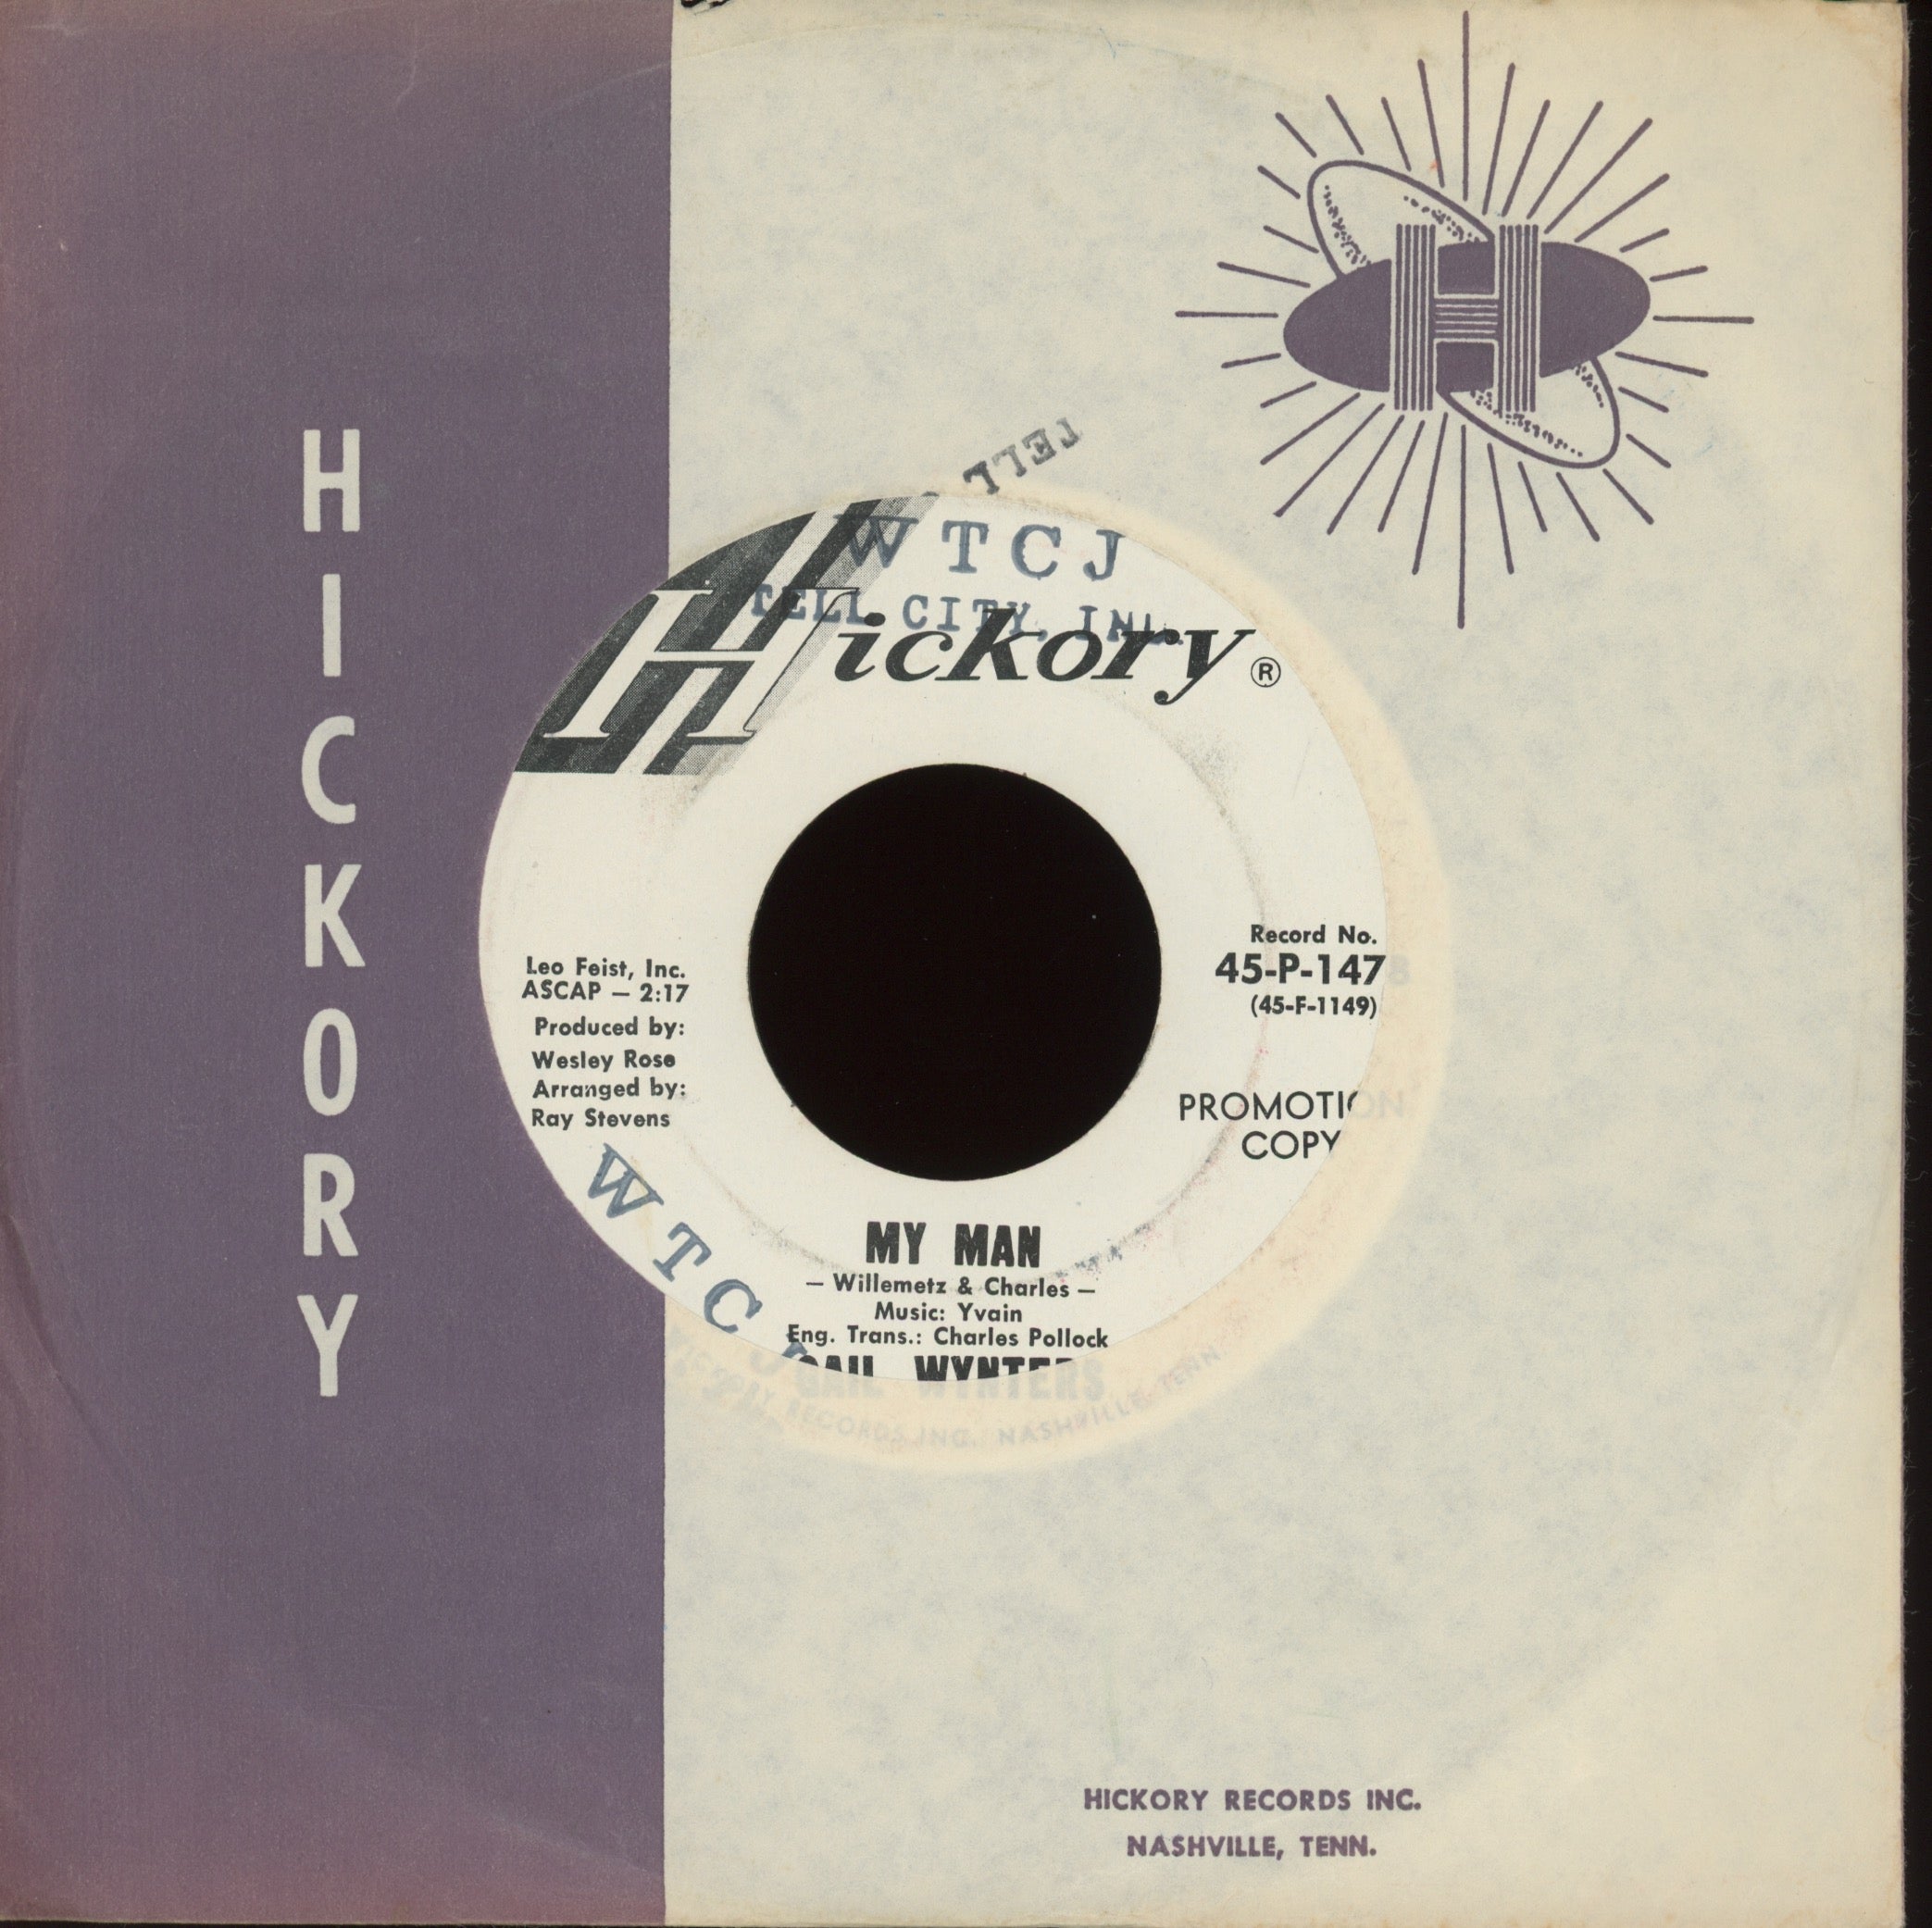 Gail Wynters - You Don't Have To Be In Love on Hickory Promo Northern Soul 45